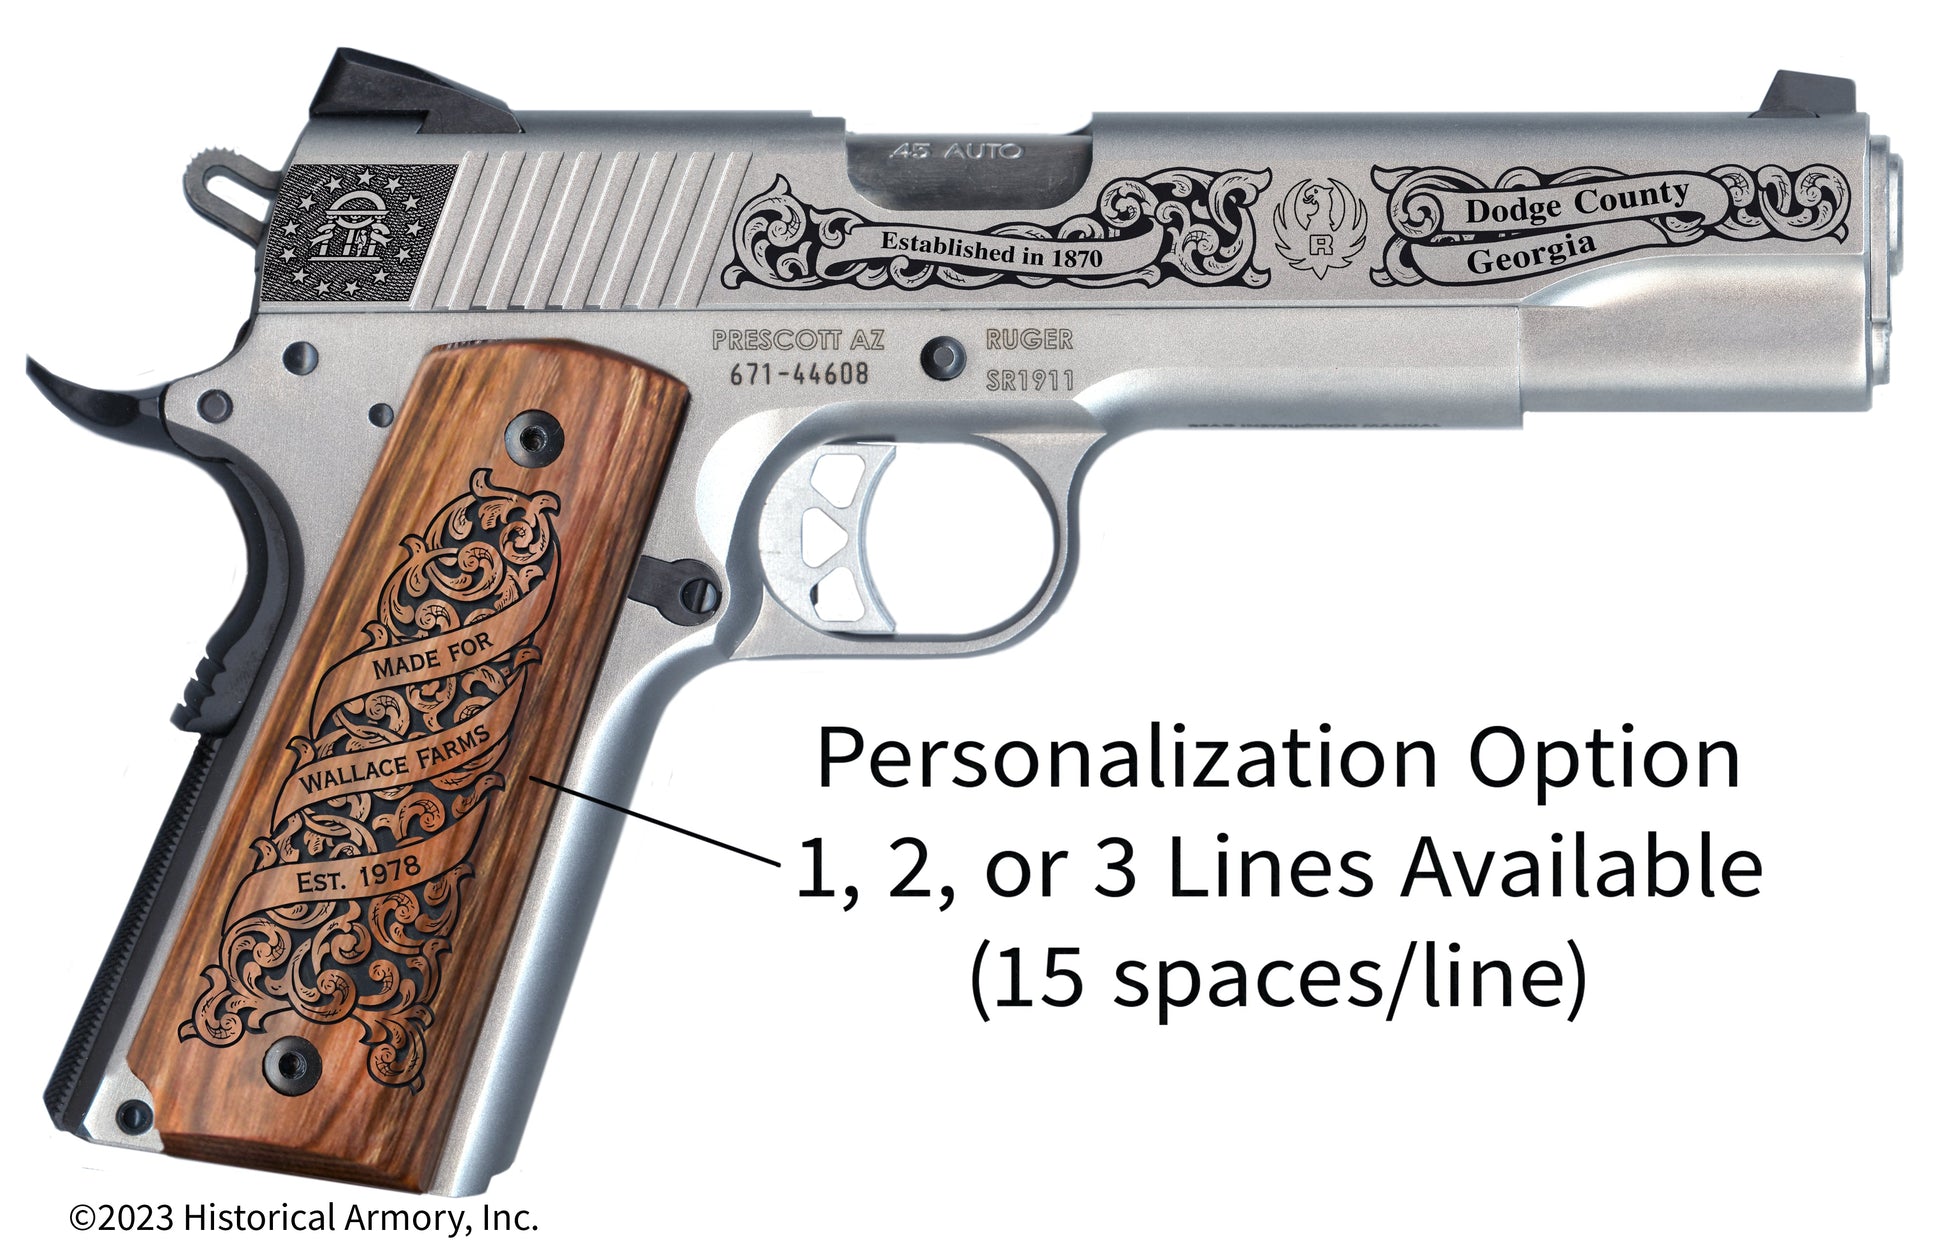 Dodge County Georgia Personalized Engraved .45 Auto Ruger 1911